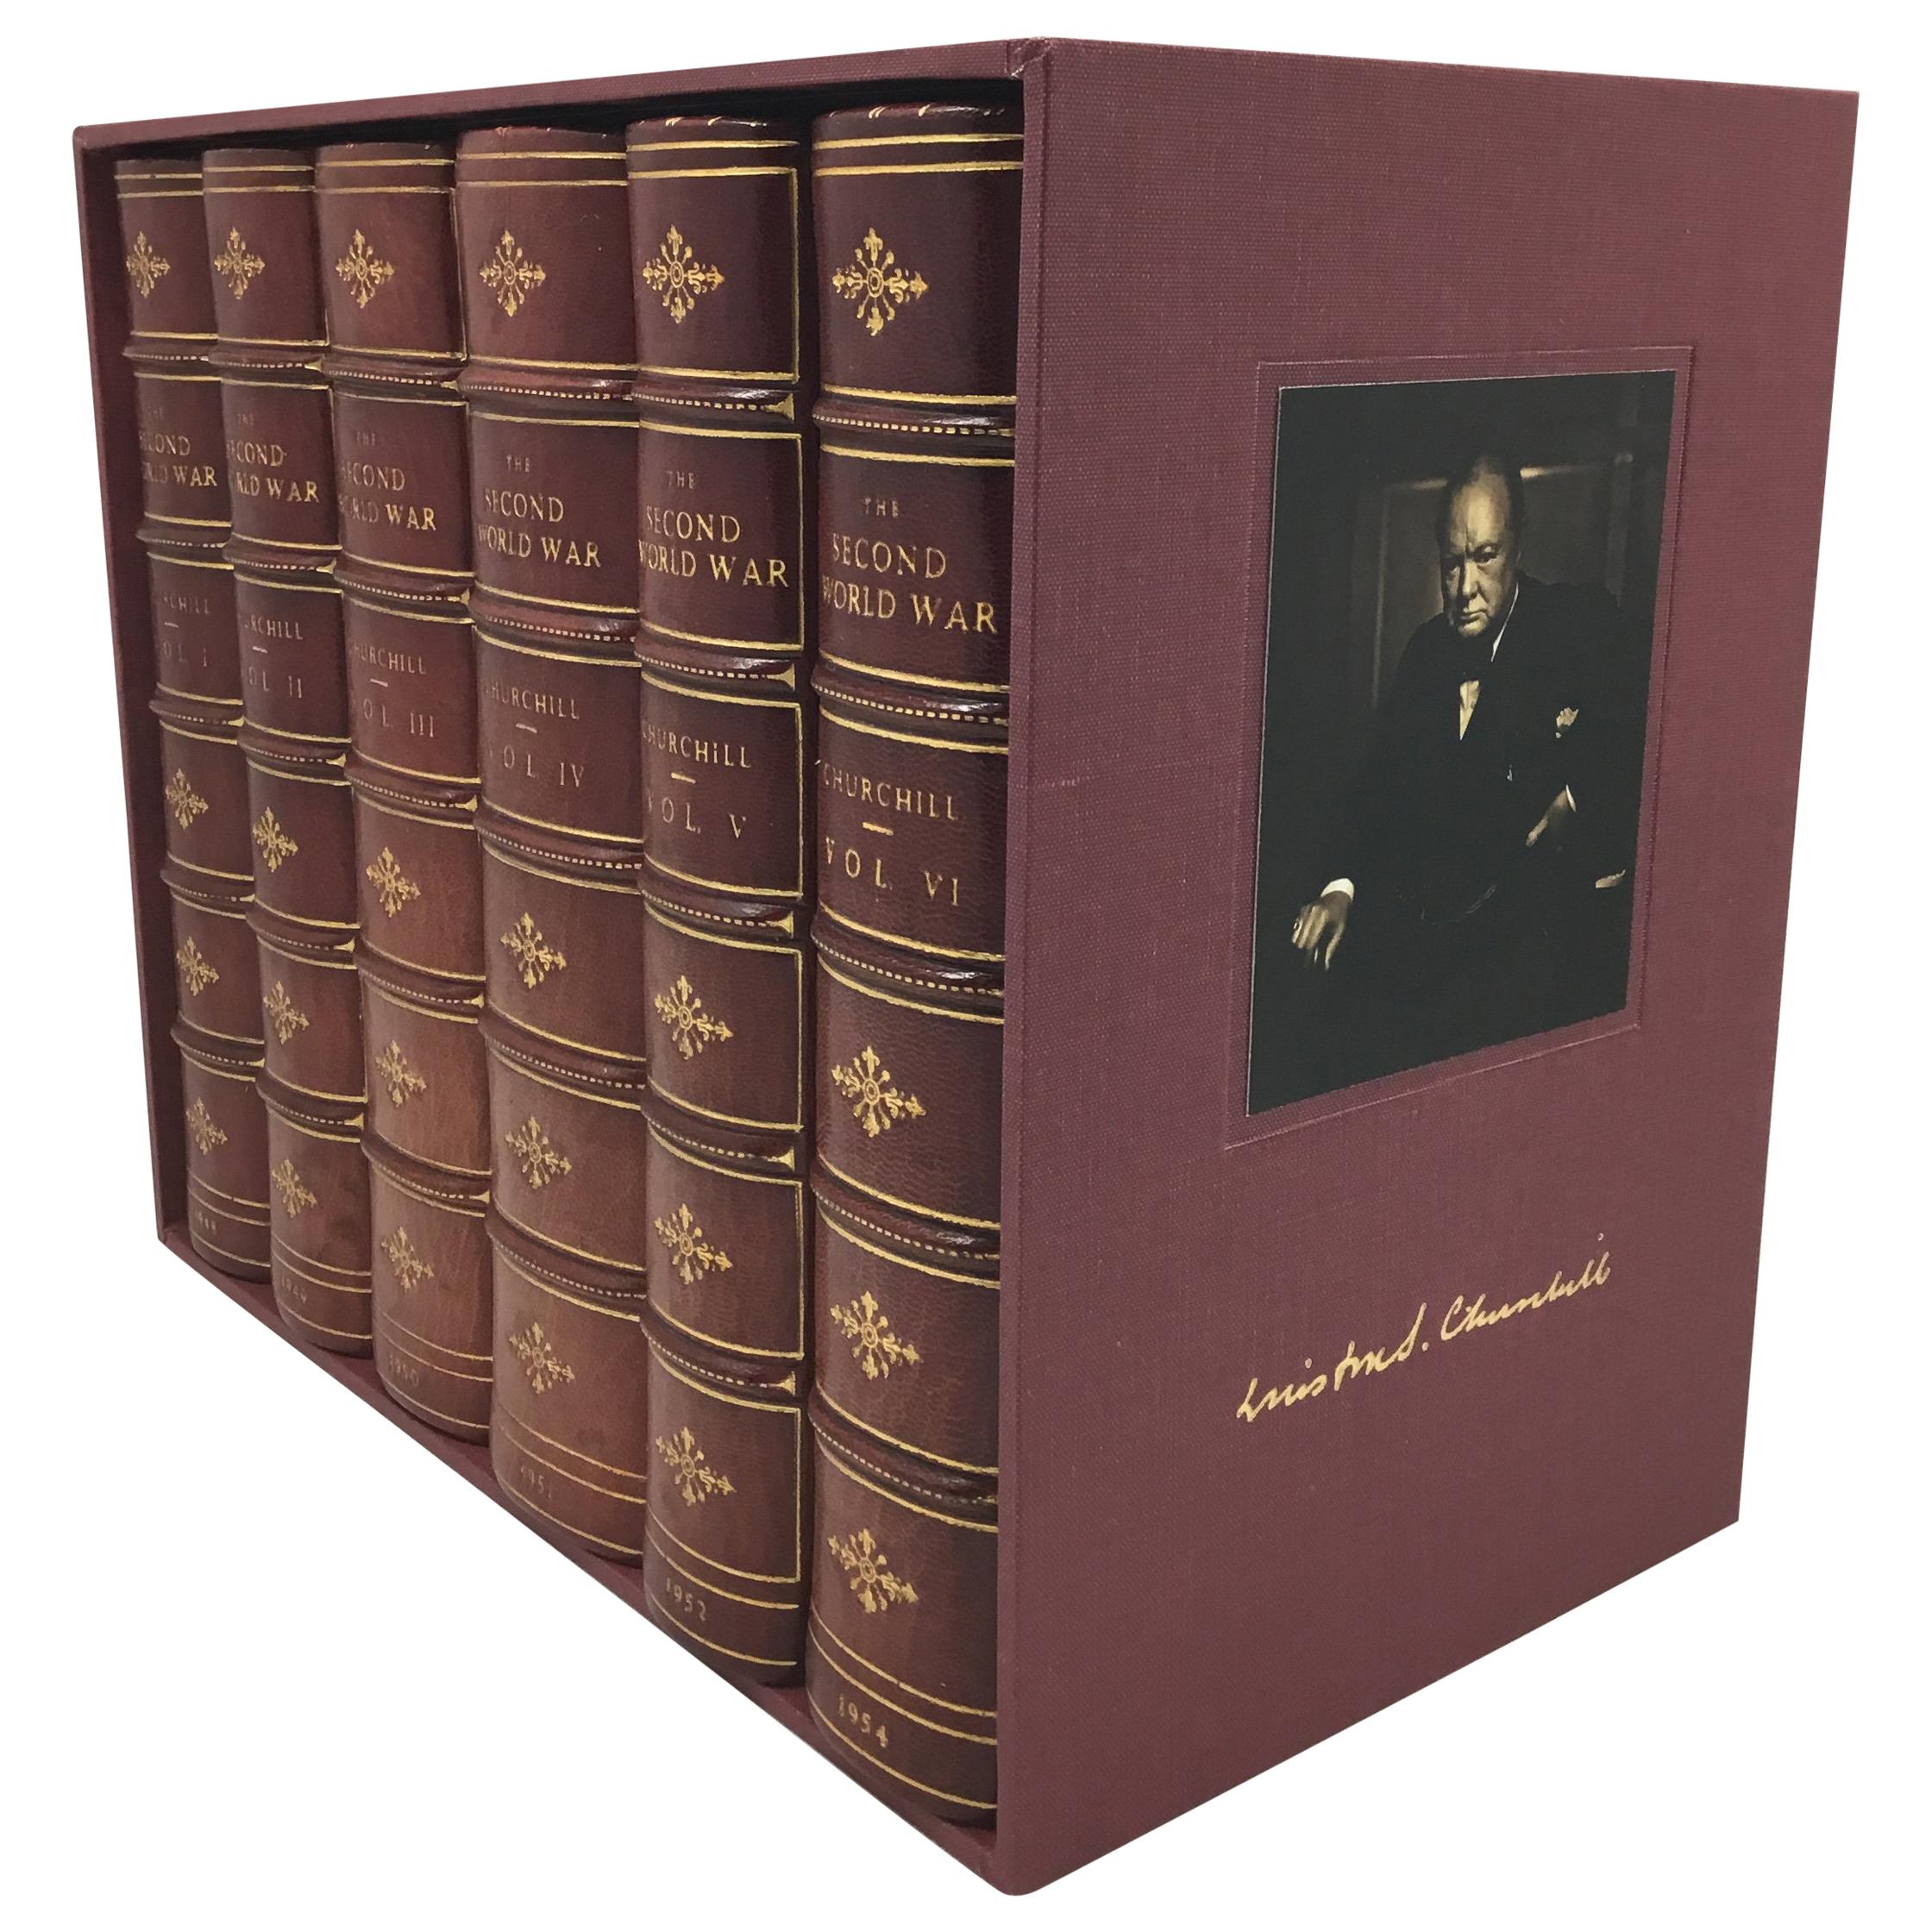 Winston Churchill Signed Set, the Second World War, 6 Volumes in Period Leather